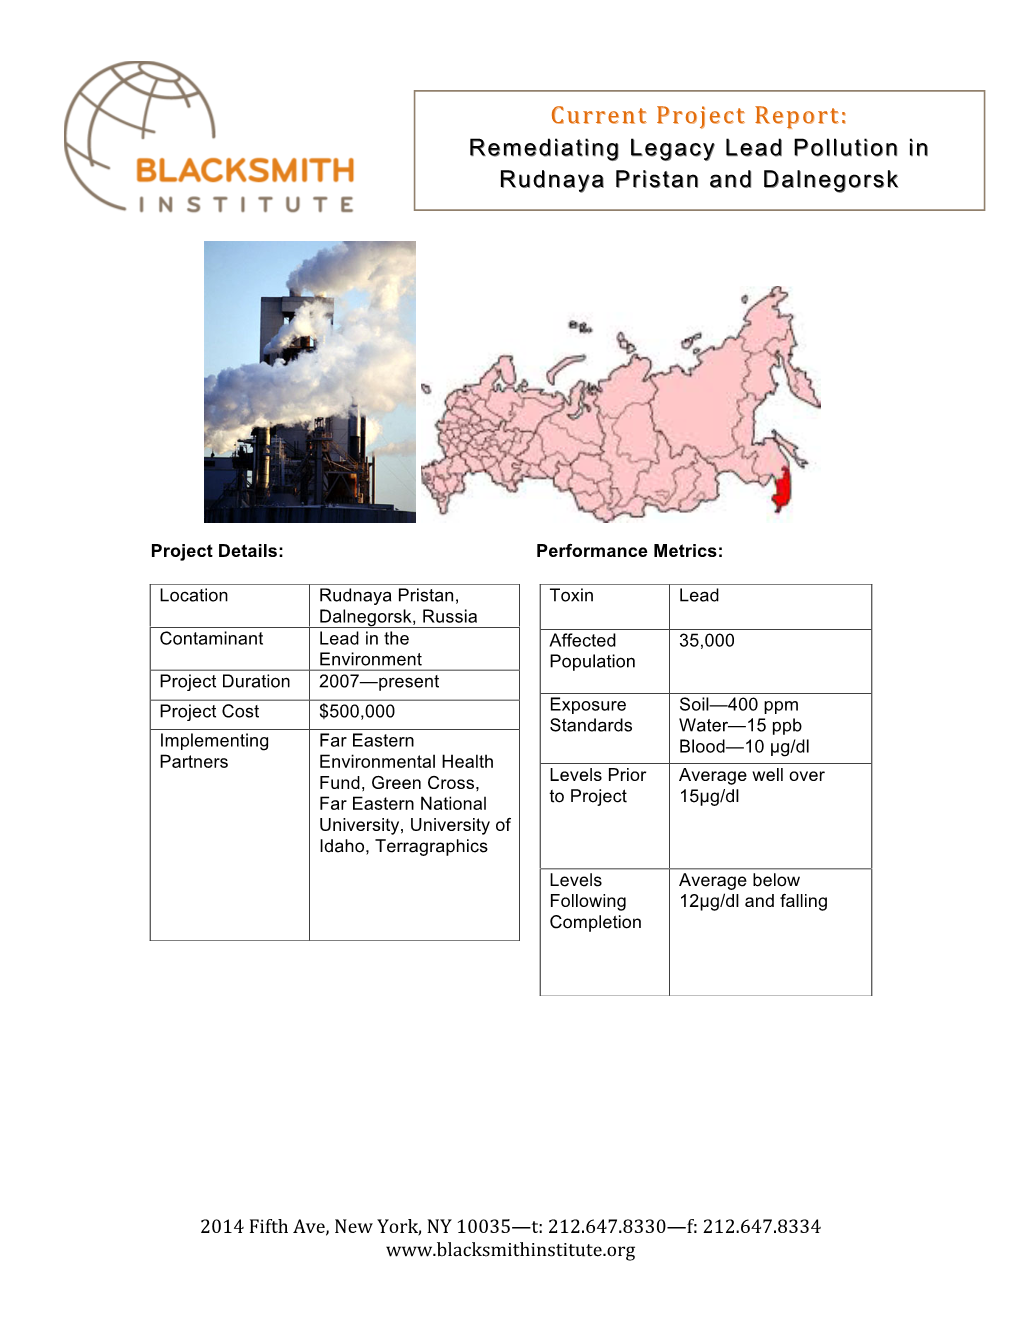 Remediating Legacy Lead Pollution in Rudnaya Pristan and Dalnegorsk